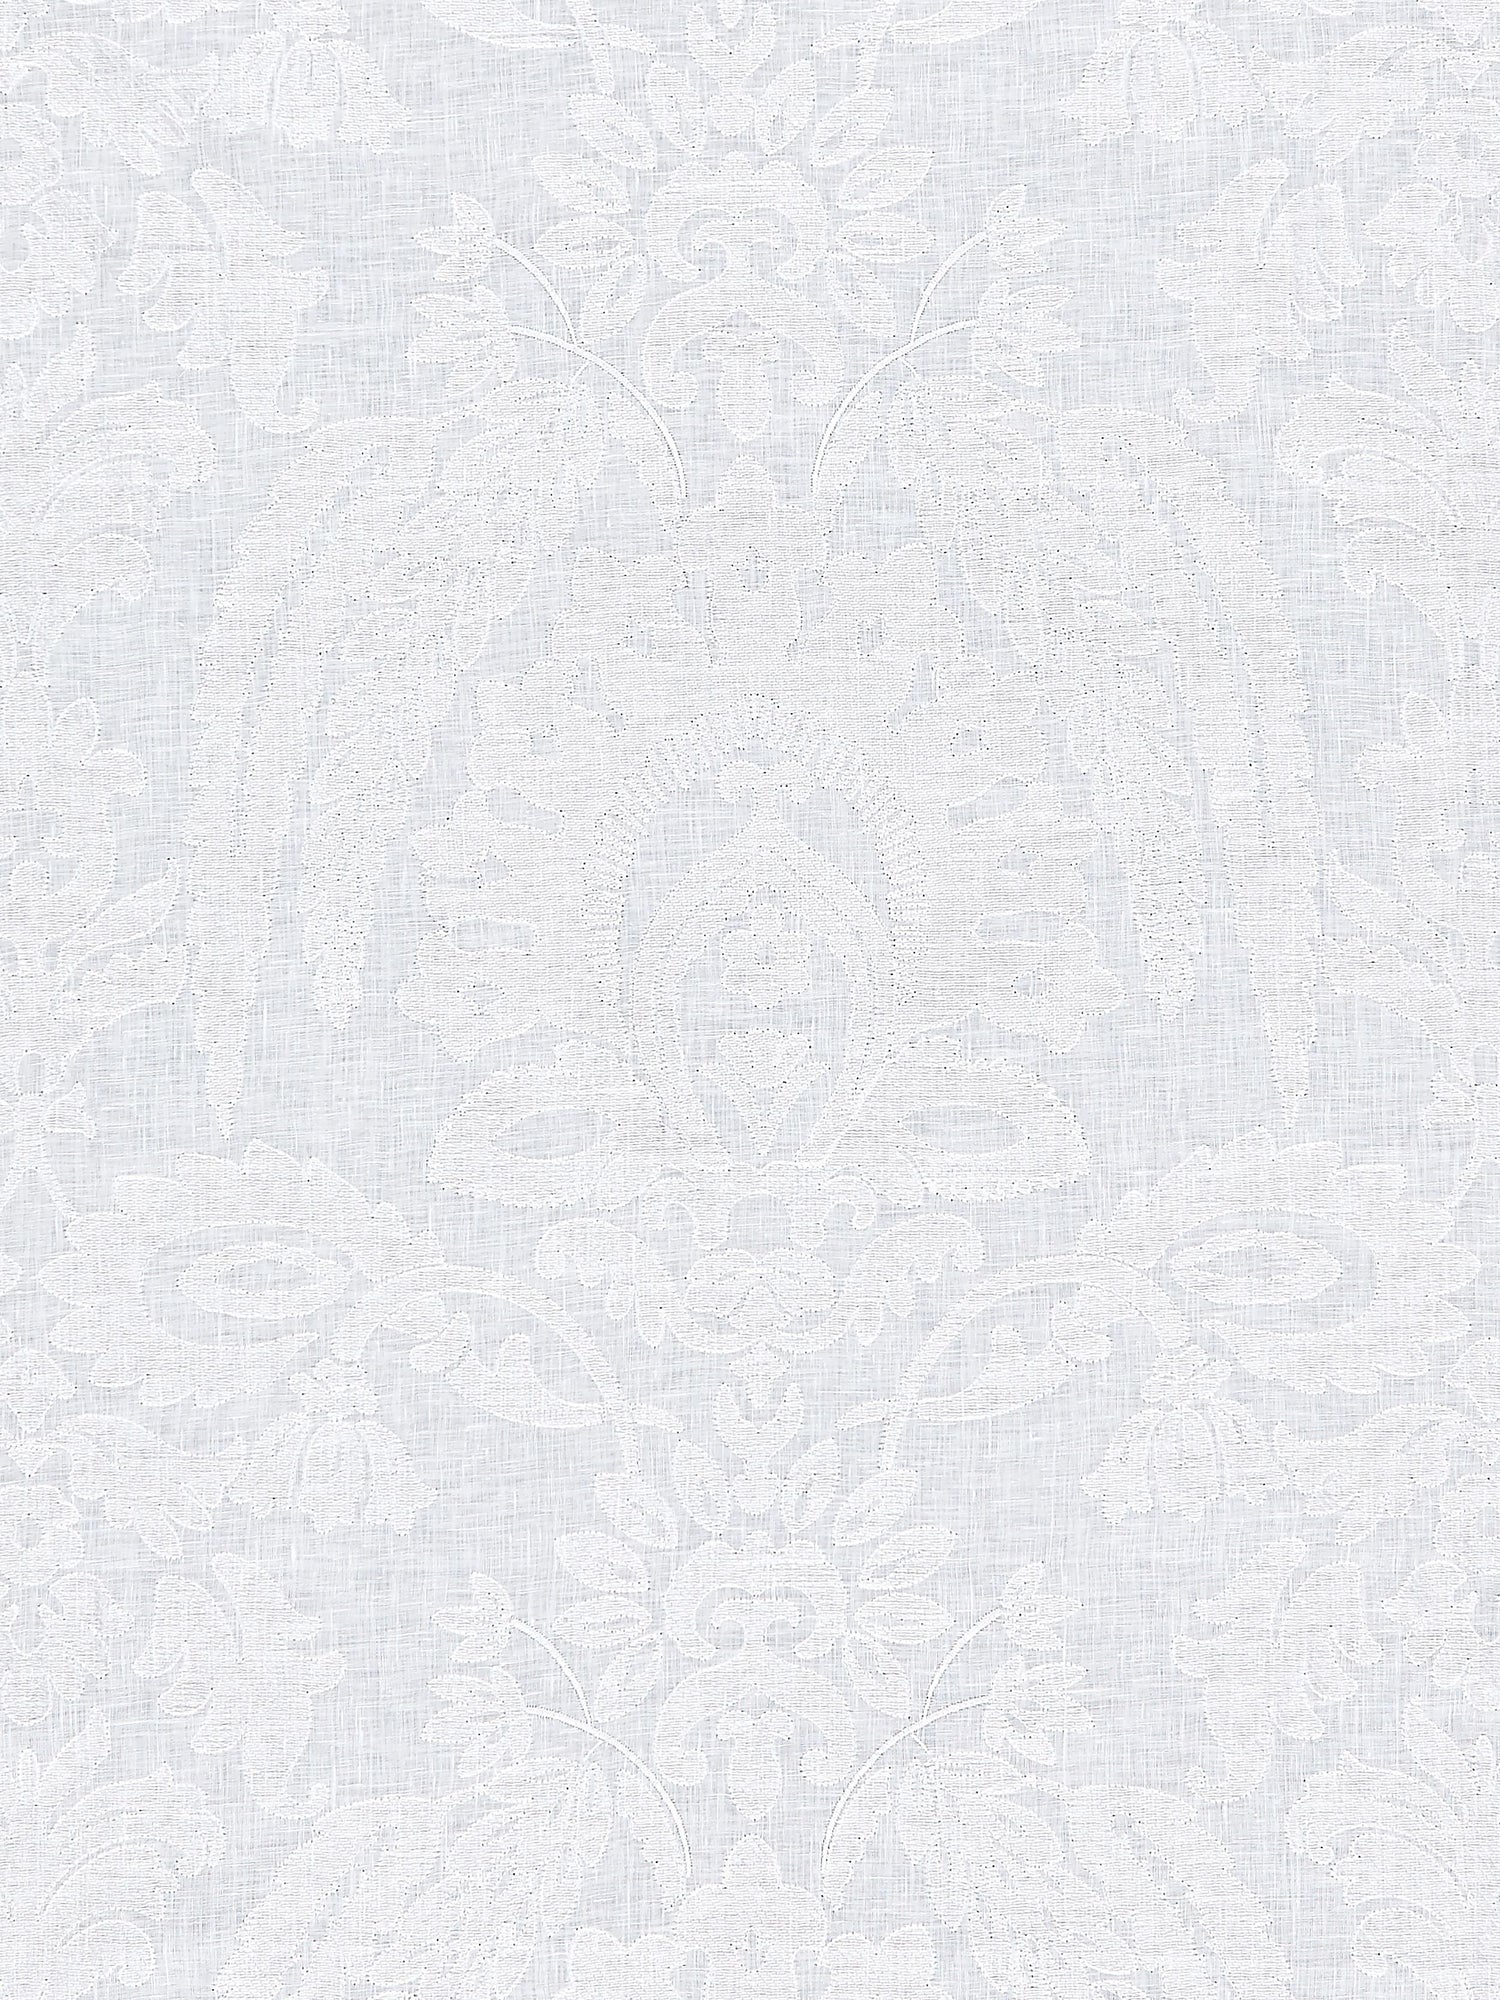 Lia Damask Sheer fabric in snow color - pattern number SC 000127053 - by Scalamandre in the Scalamandre Fabrics Book 1 collection